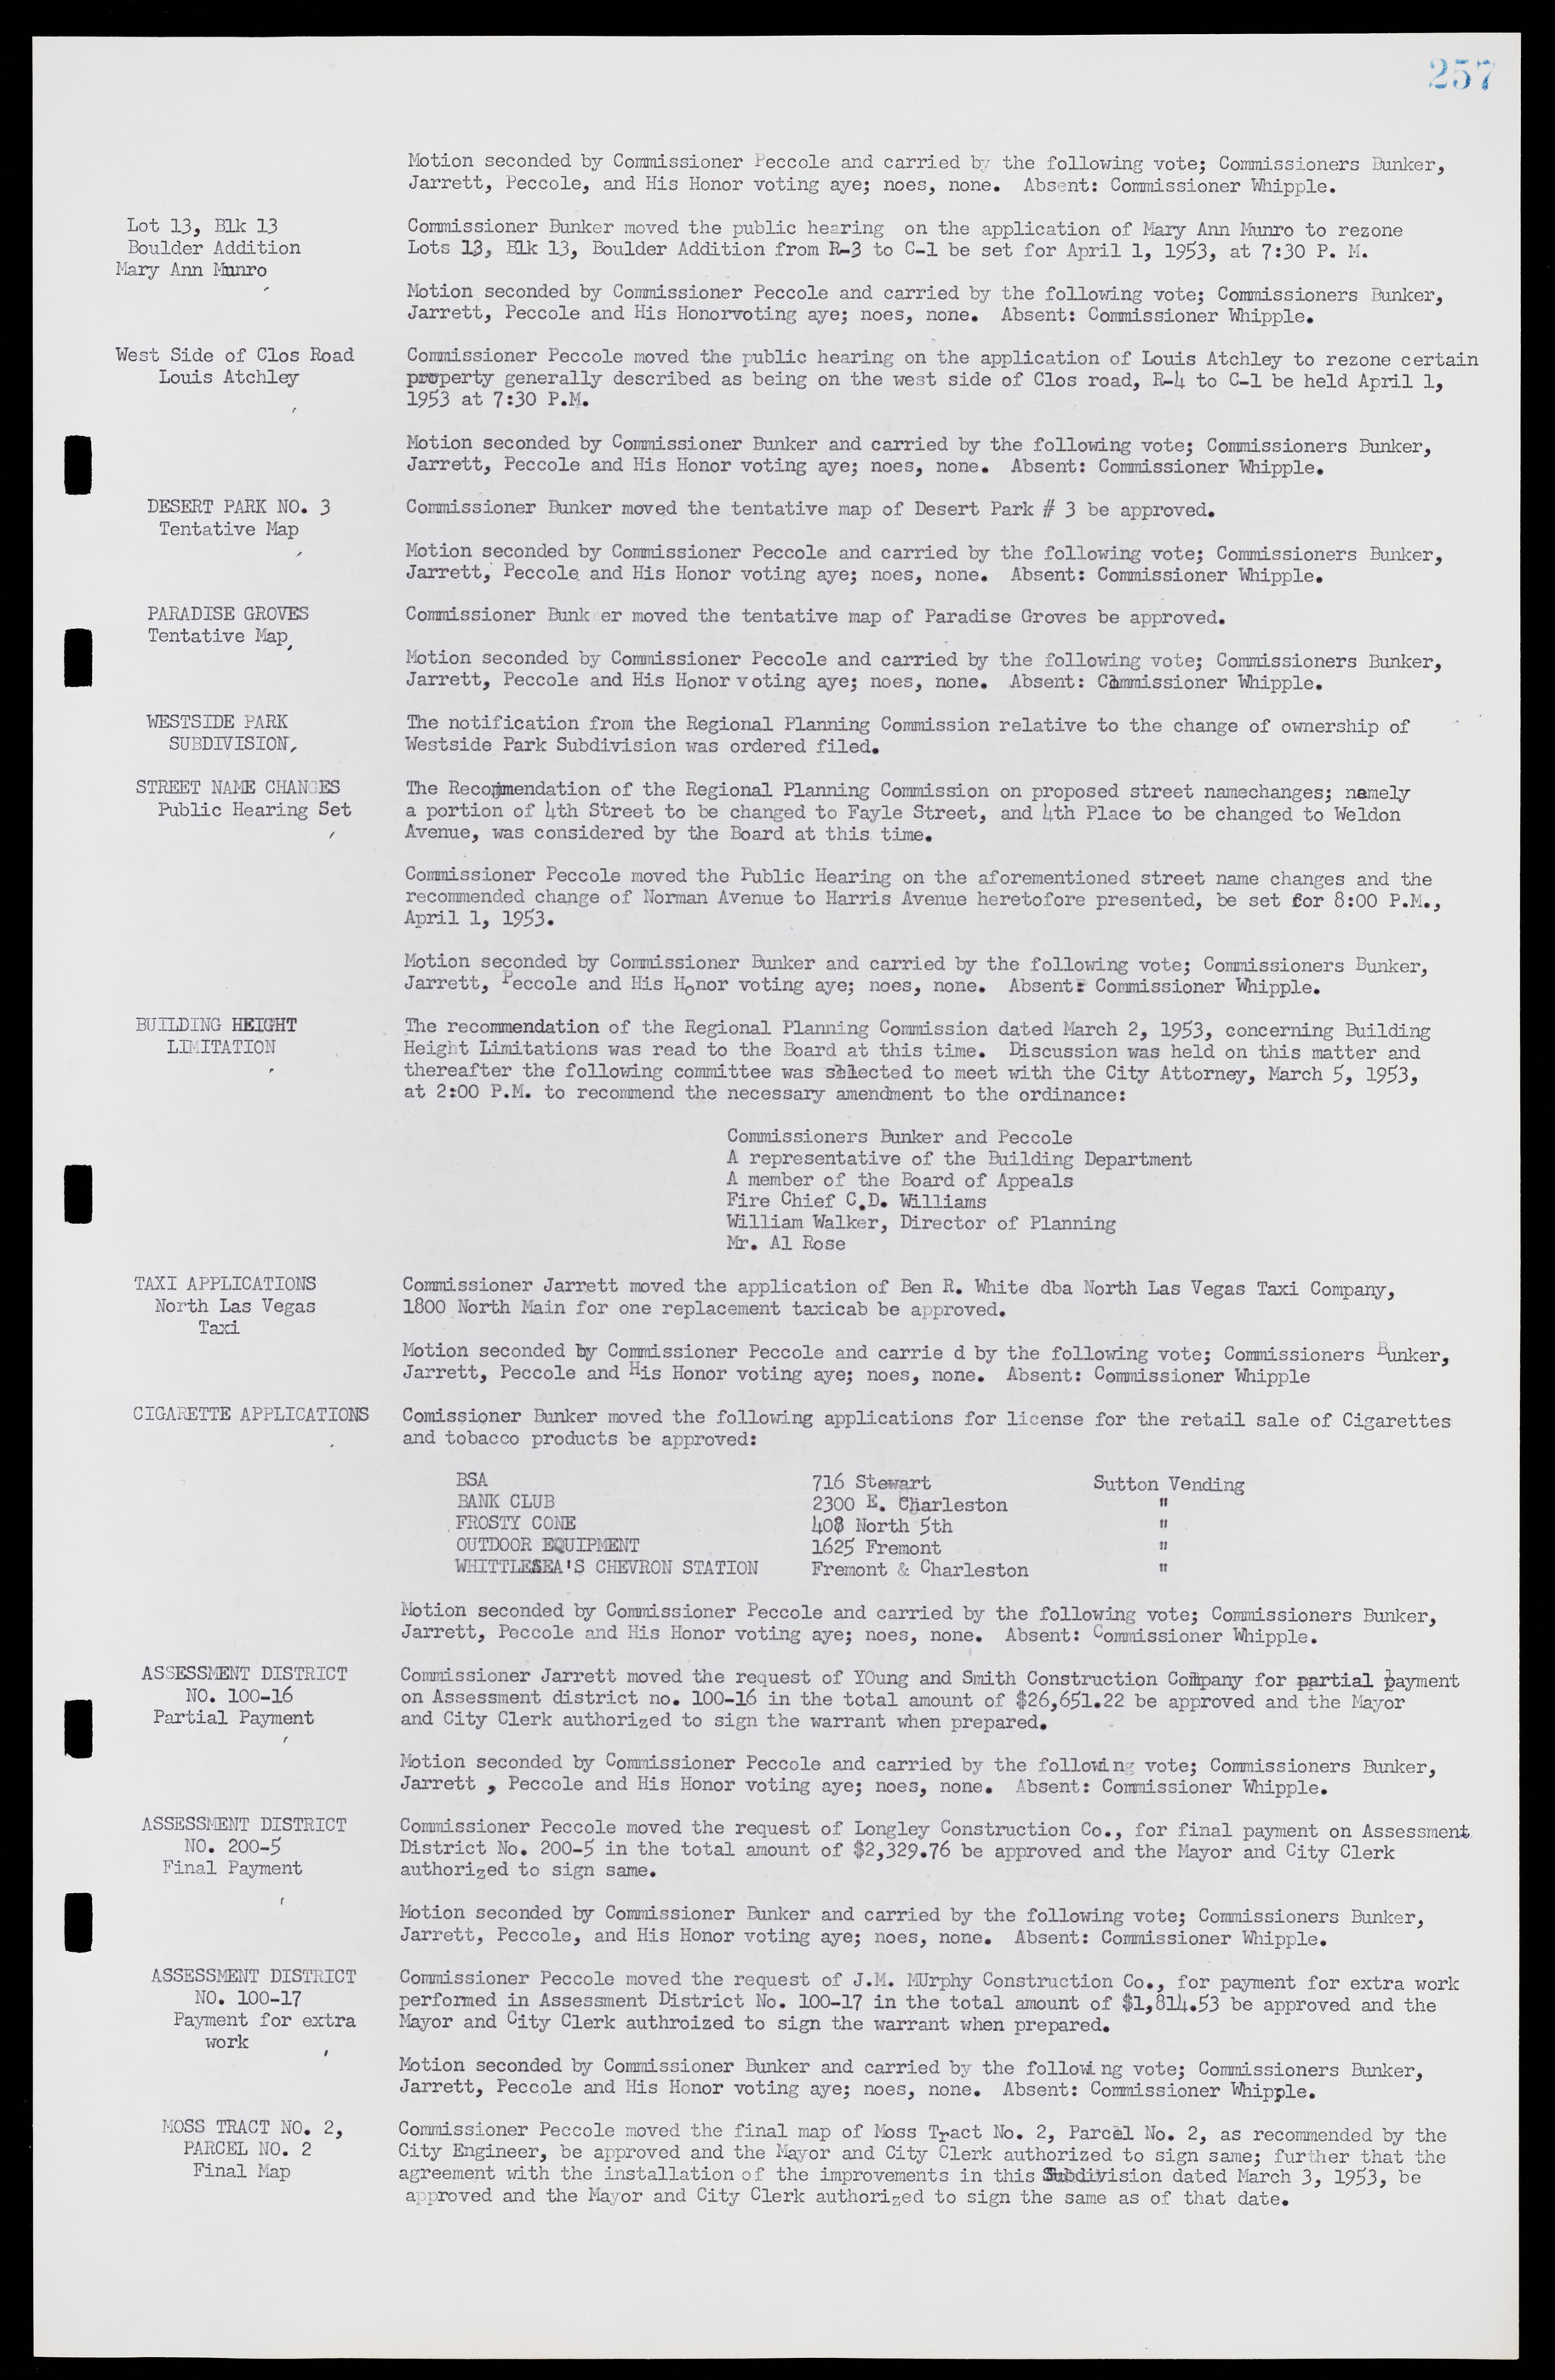 Las Vegas City Commission Minutes, May 26, 1952 to February 17, 1954, lvc000008-273